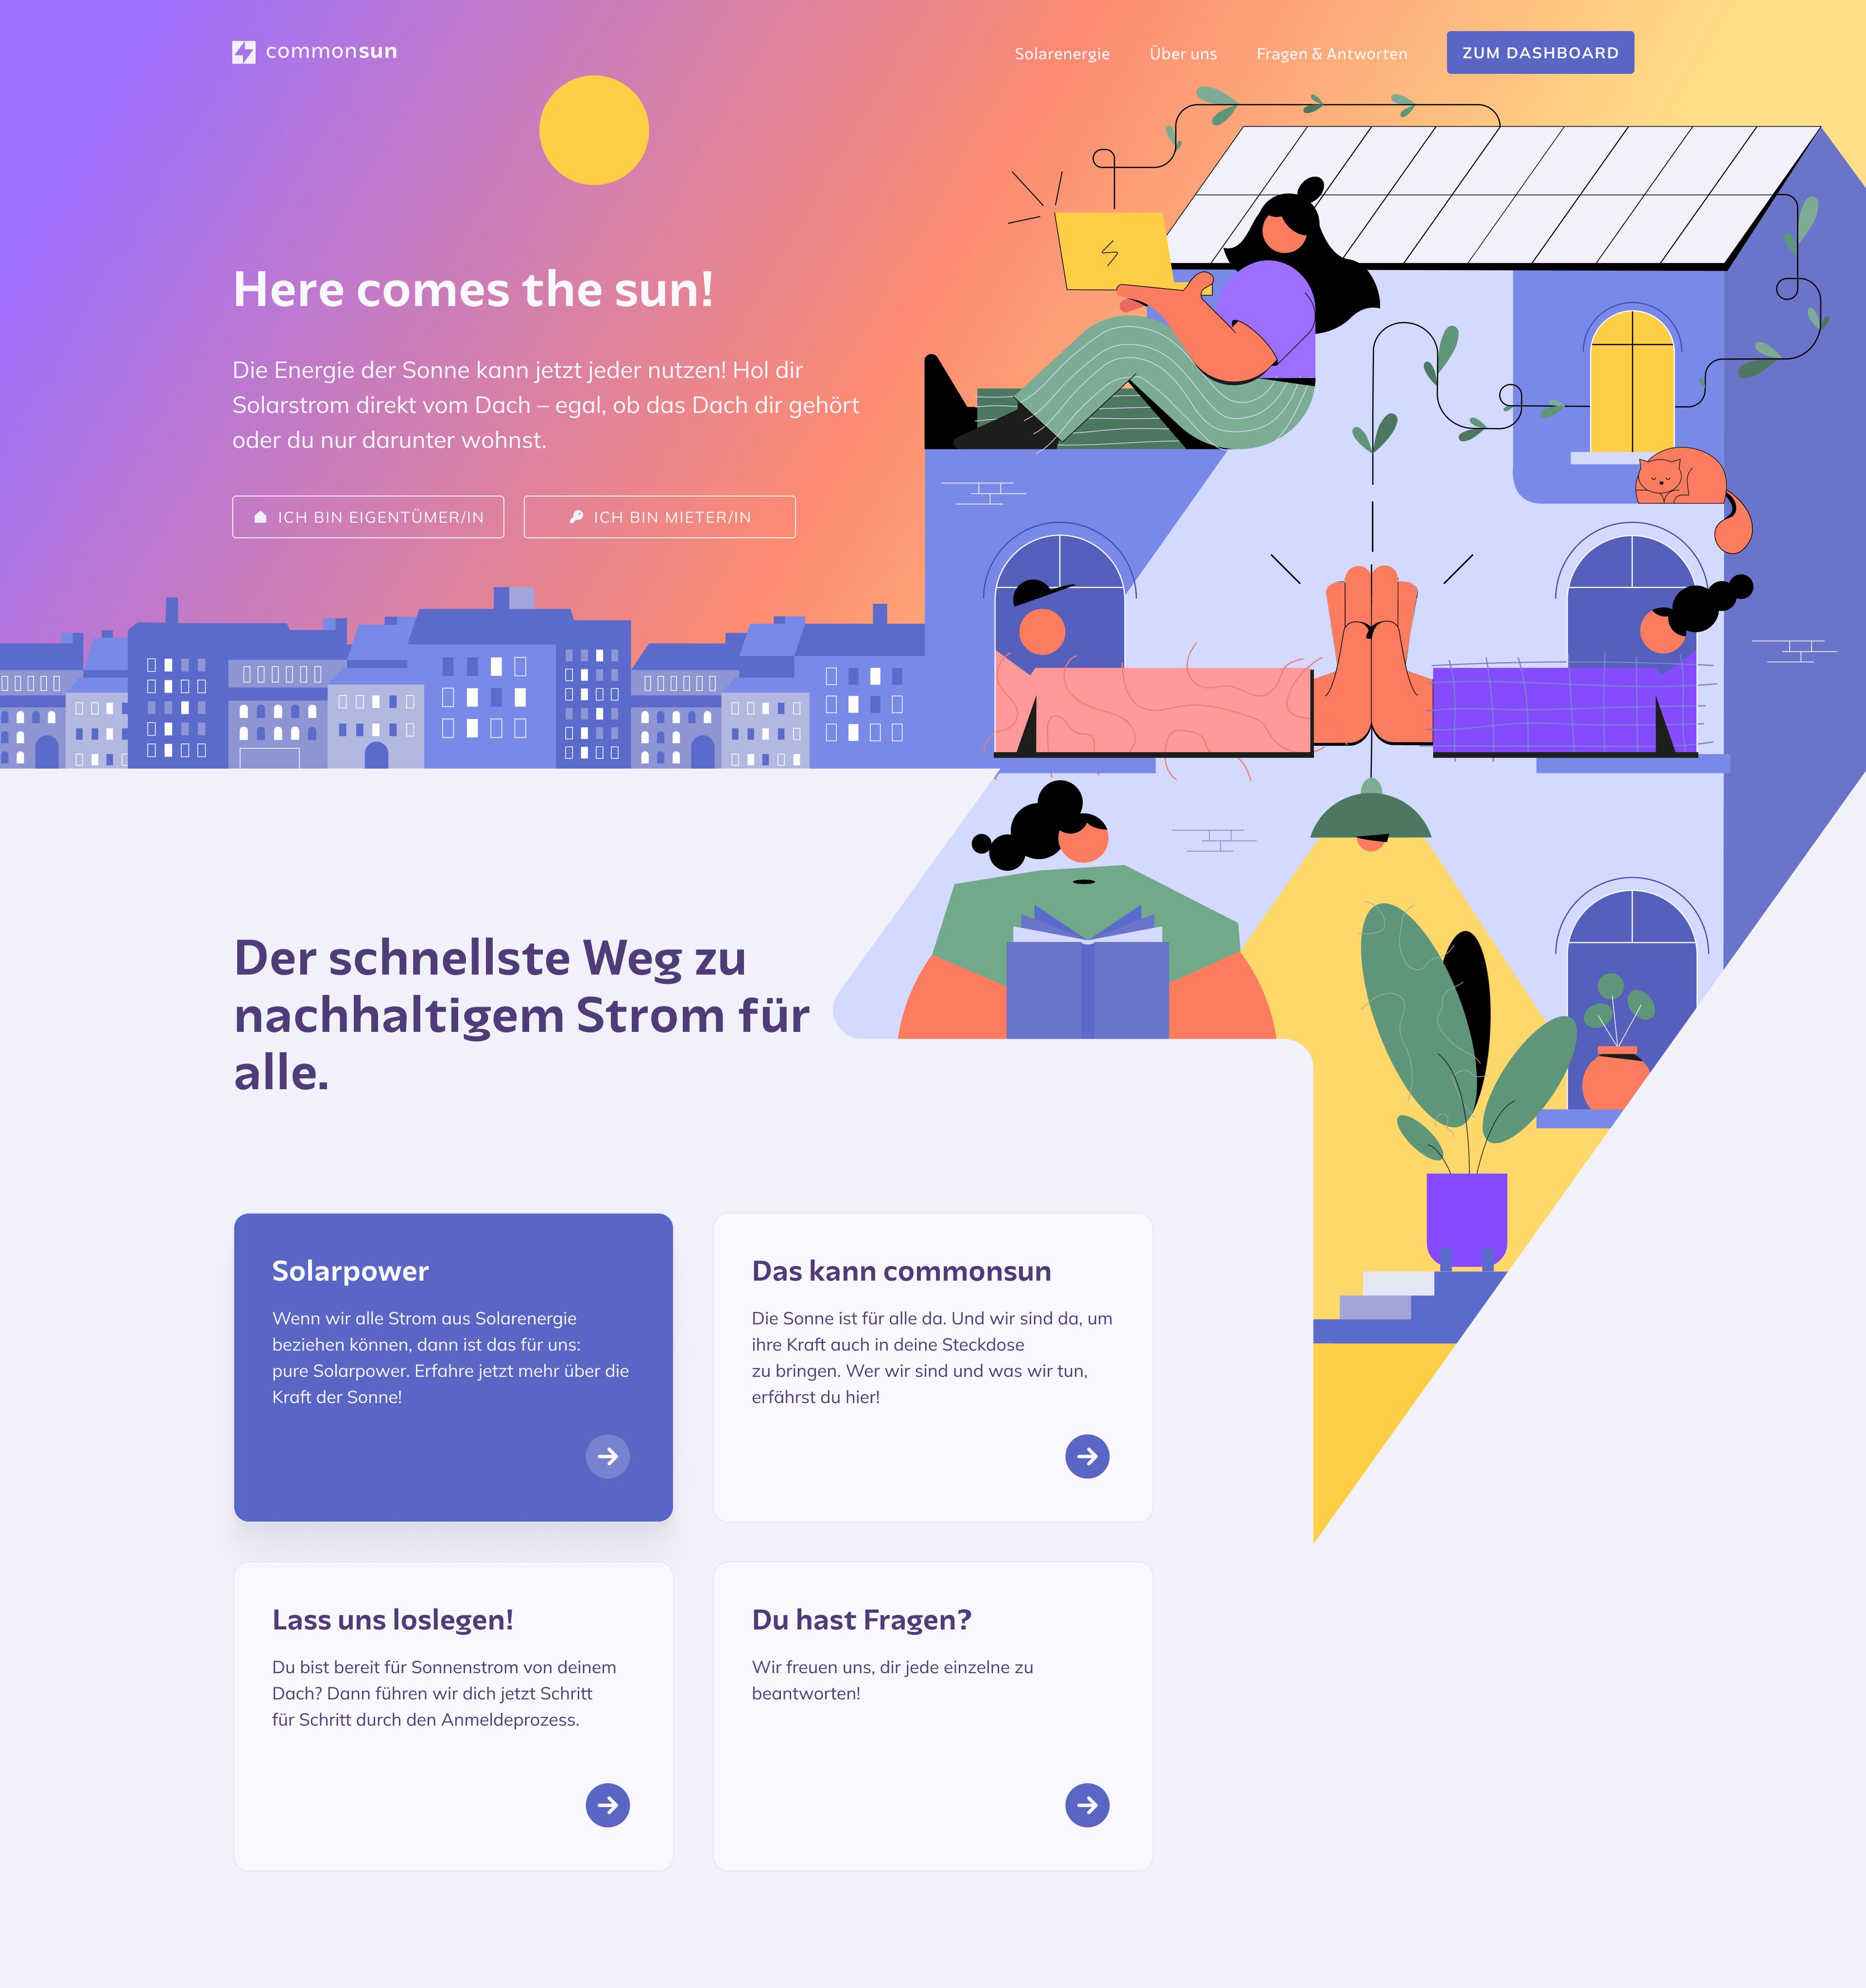 "commonsun landing page with illustration of people in house"